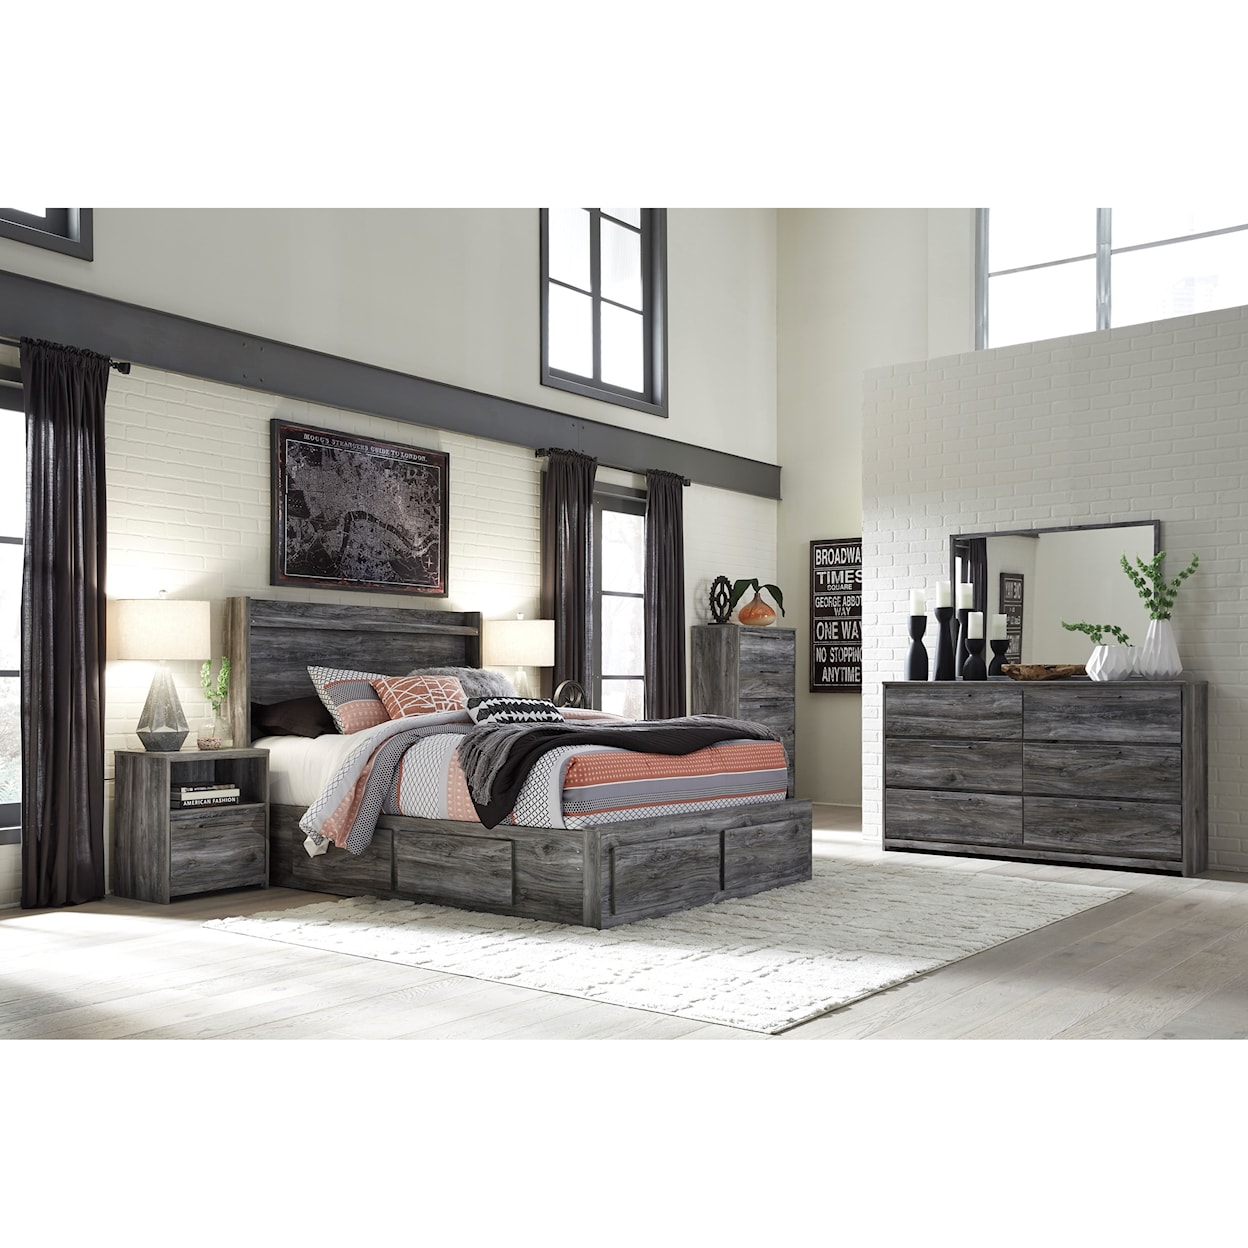 Signature Baylor Queen Storage Bed with 6 Drawers